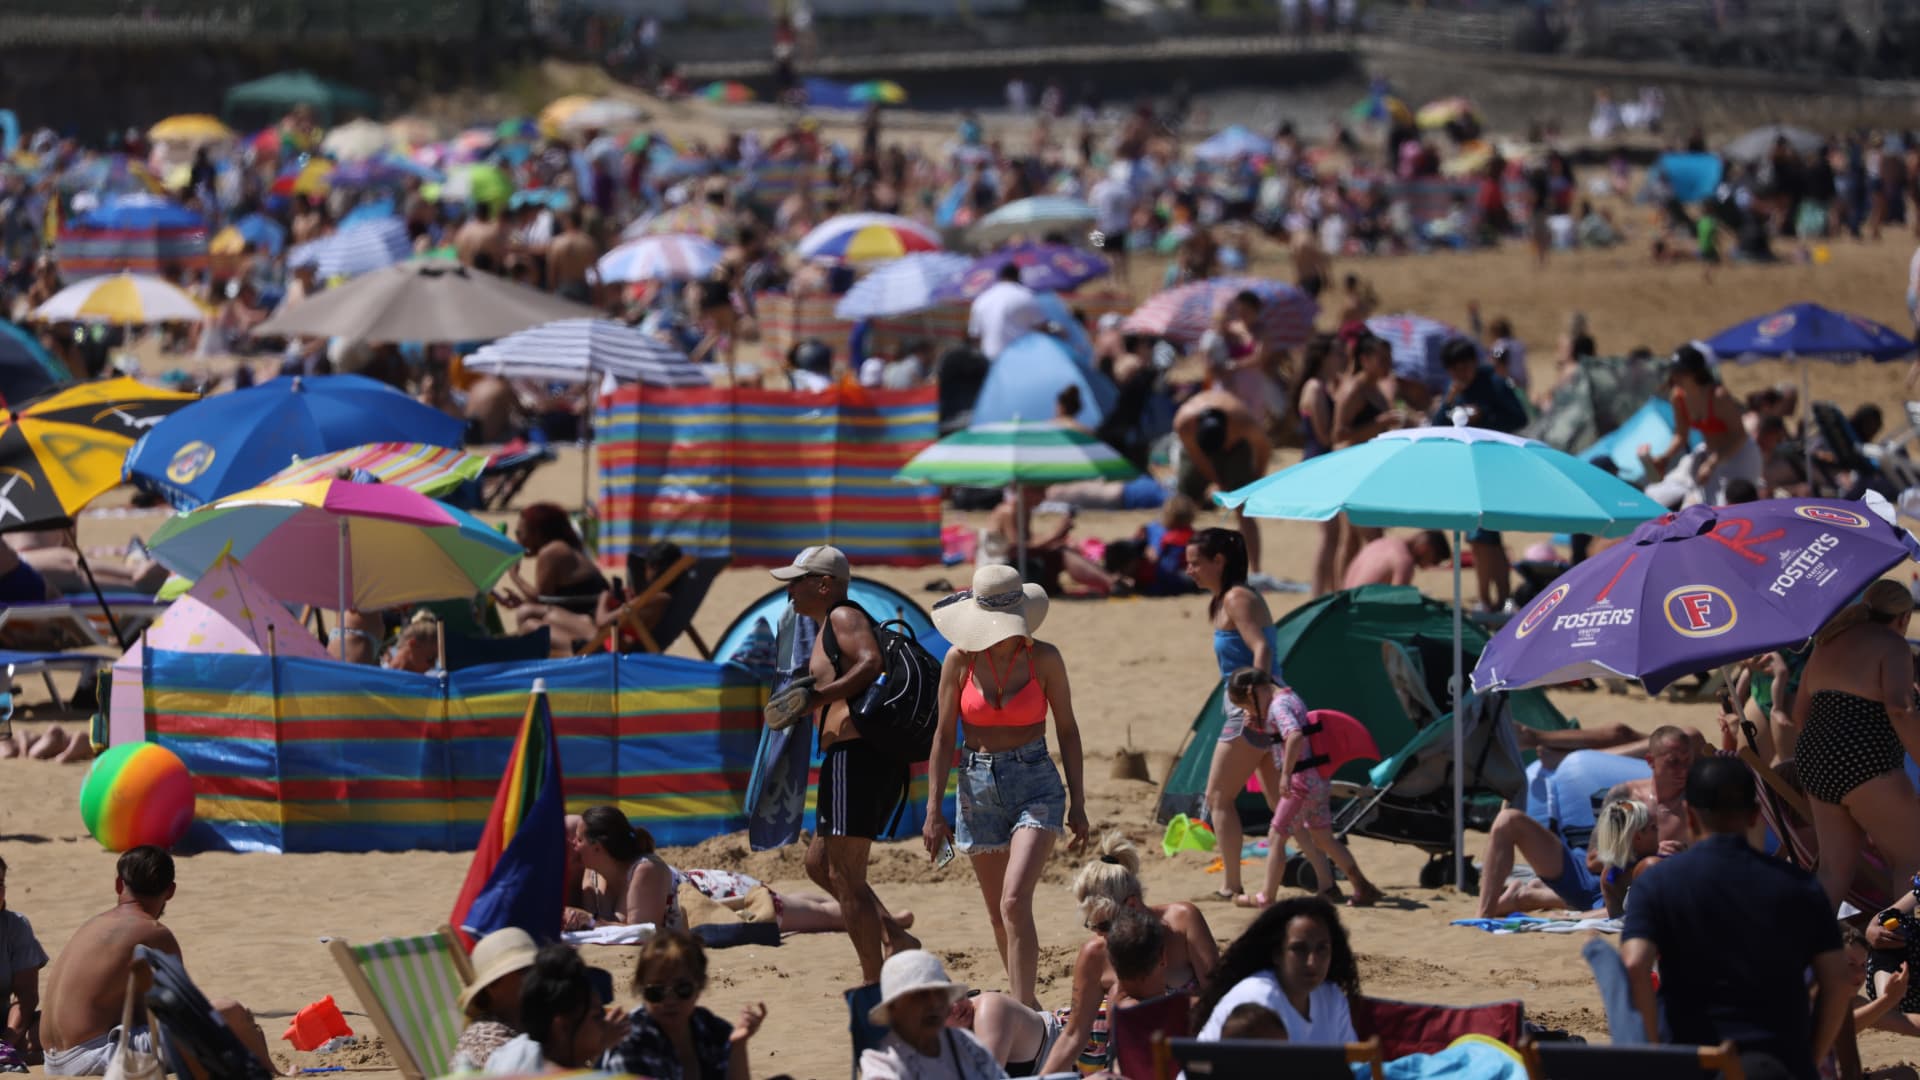 UK braces for hottest day on record with highs of 106 degrees Fahrenheit expected